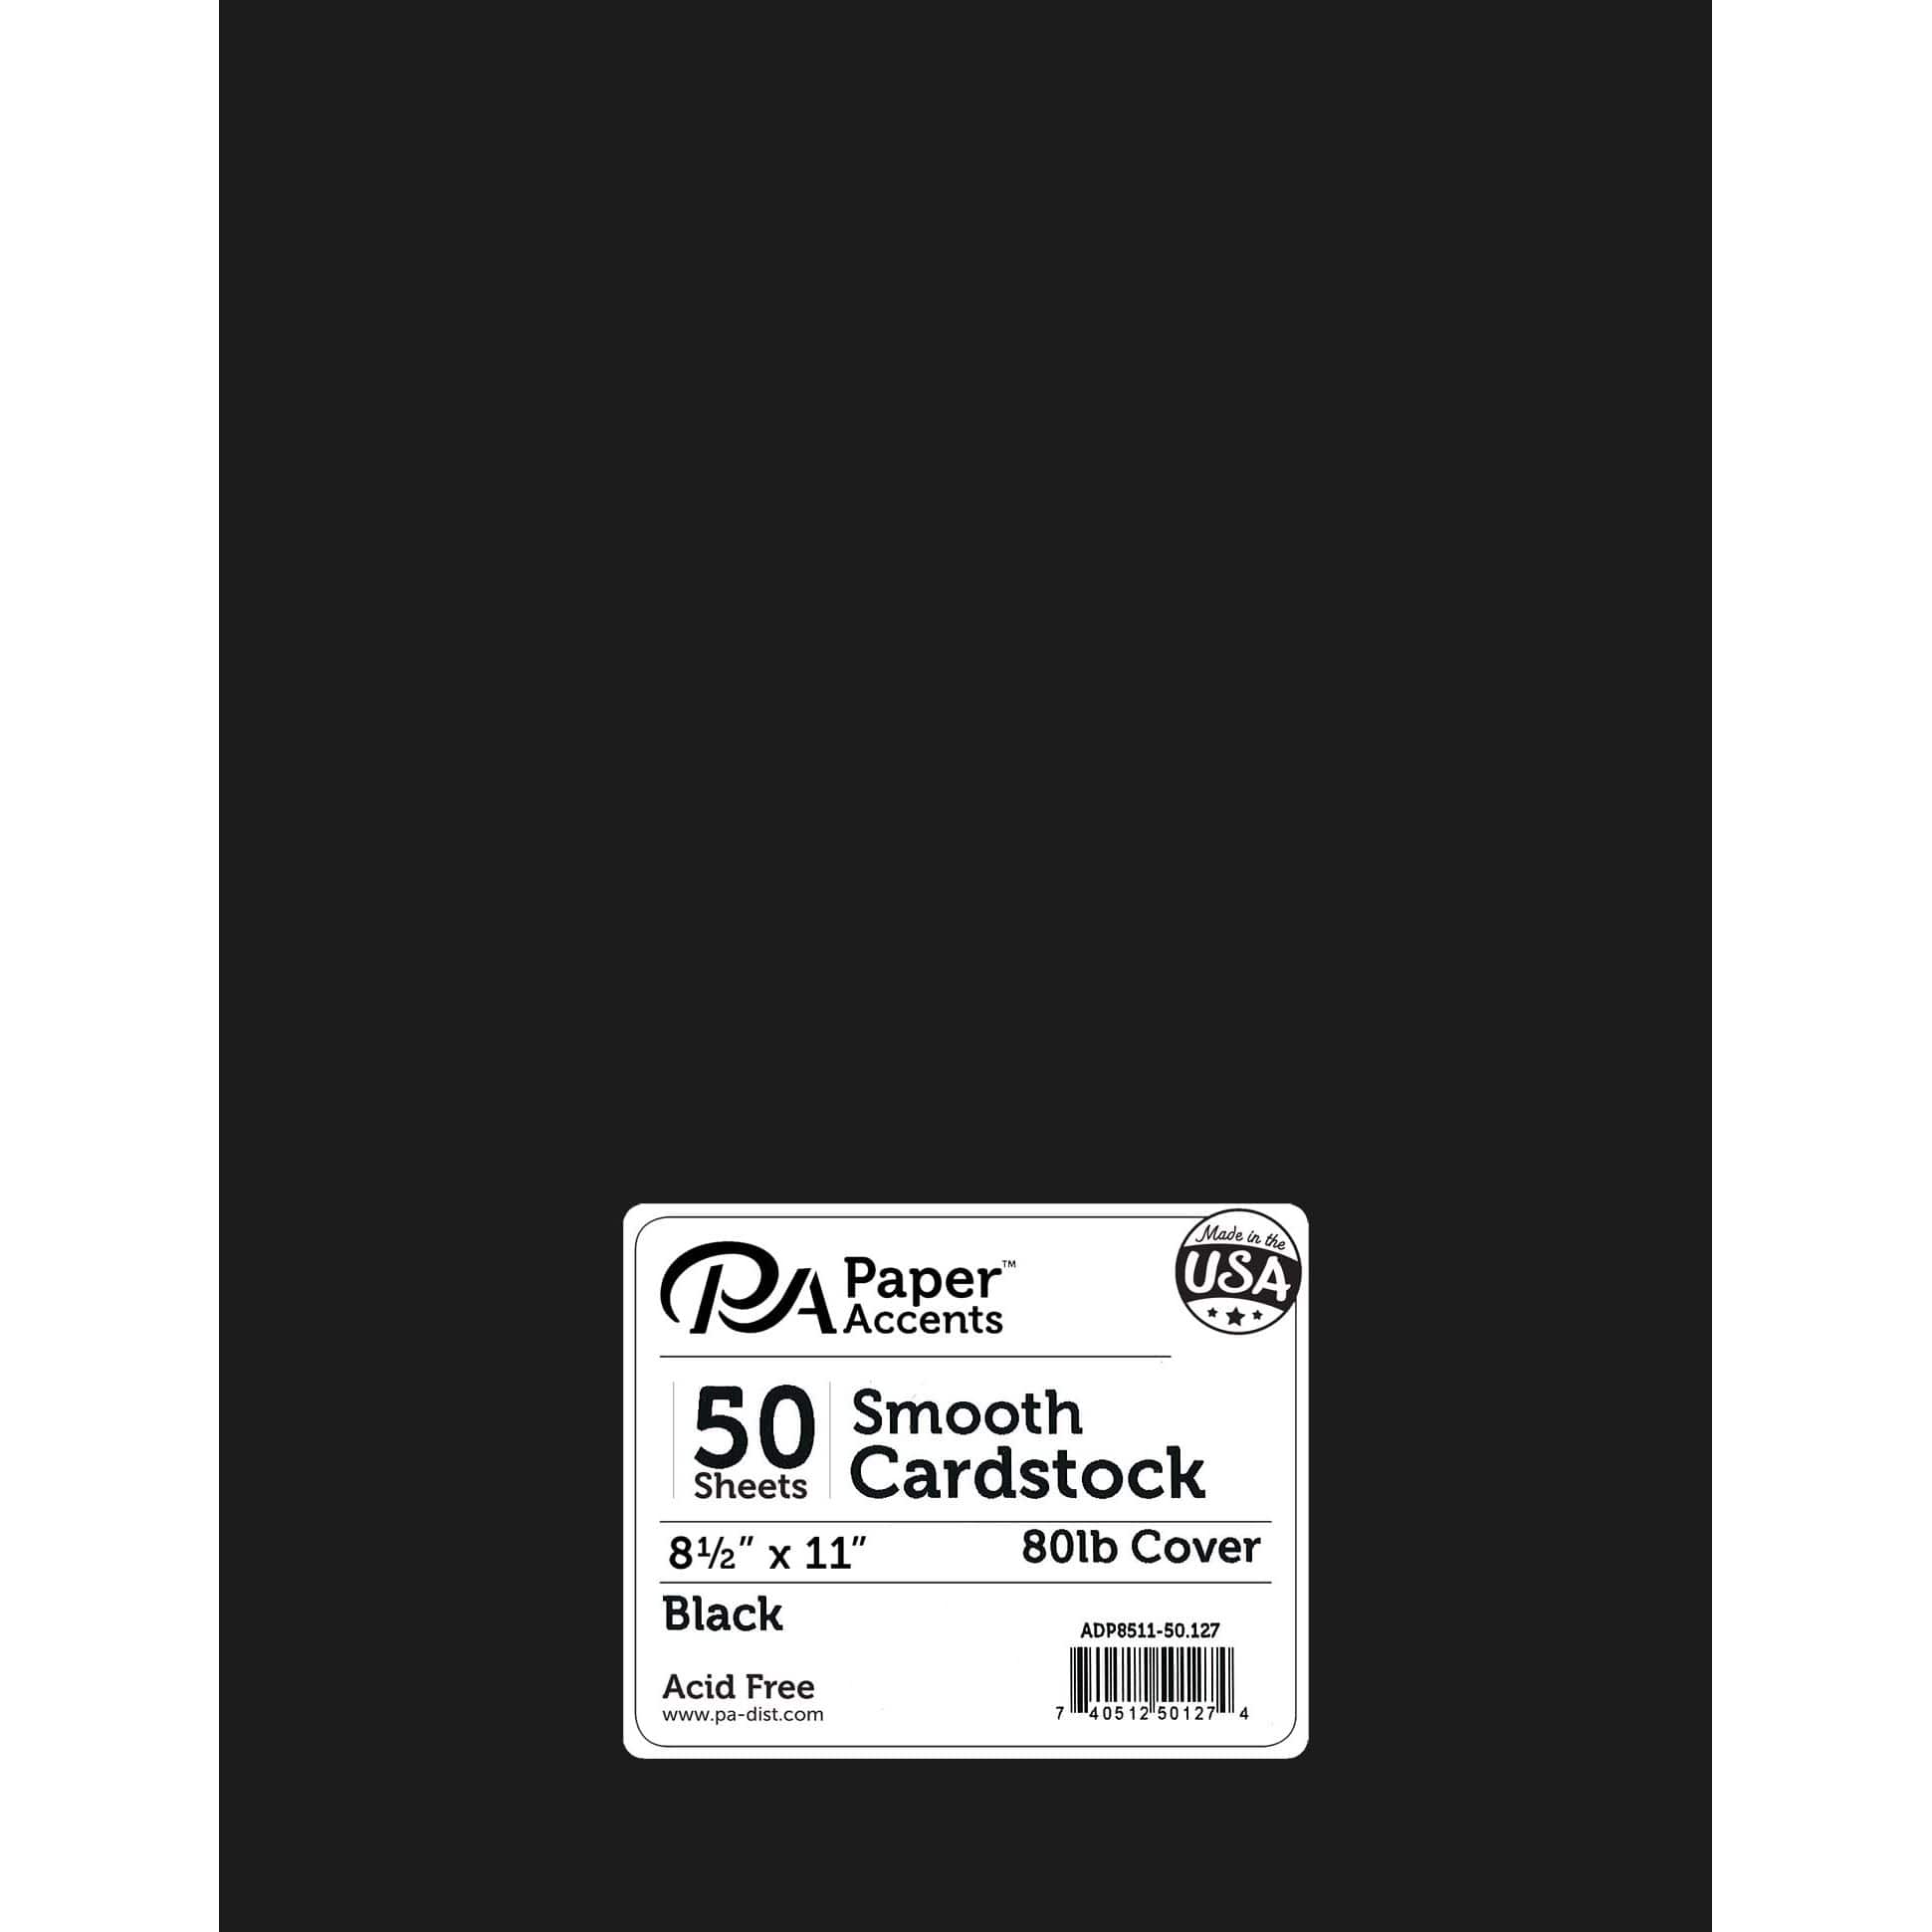 PA Paper™ Accents 8.5 x 11 80lb. Black Smooth Cardstock, 50